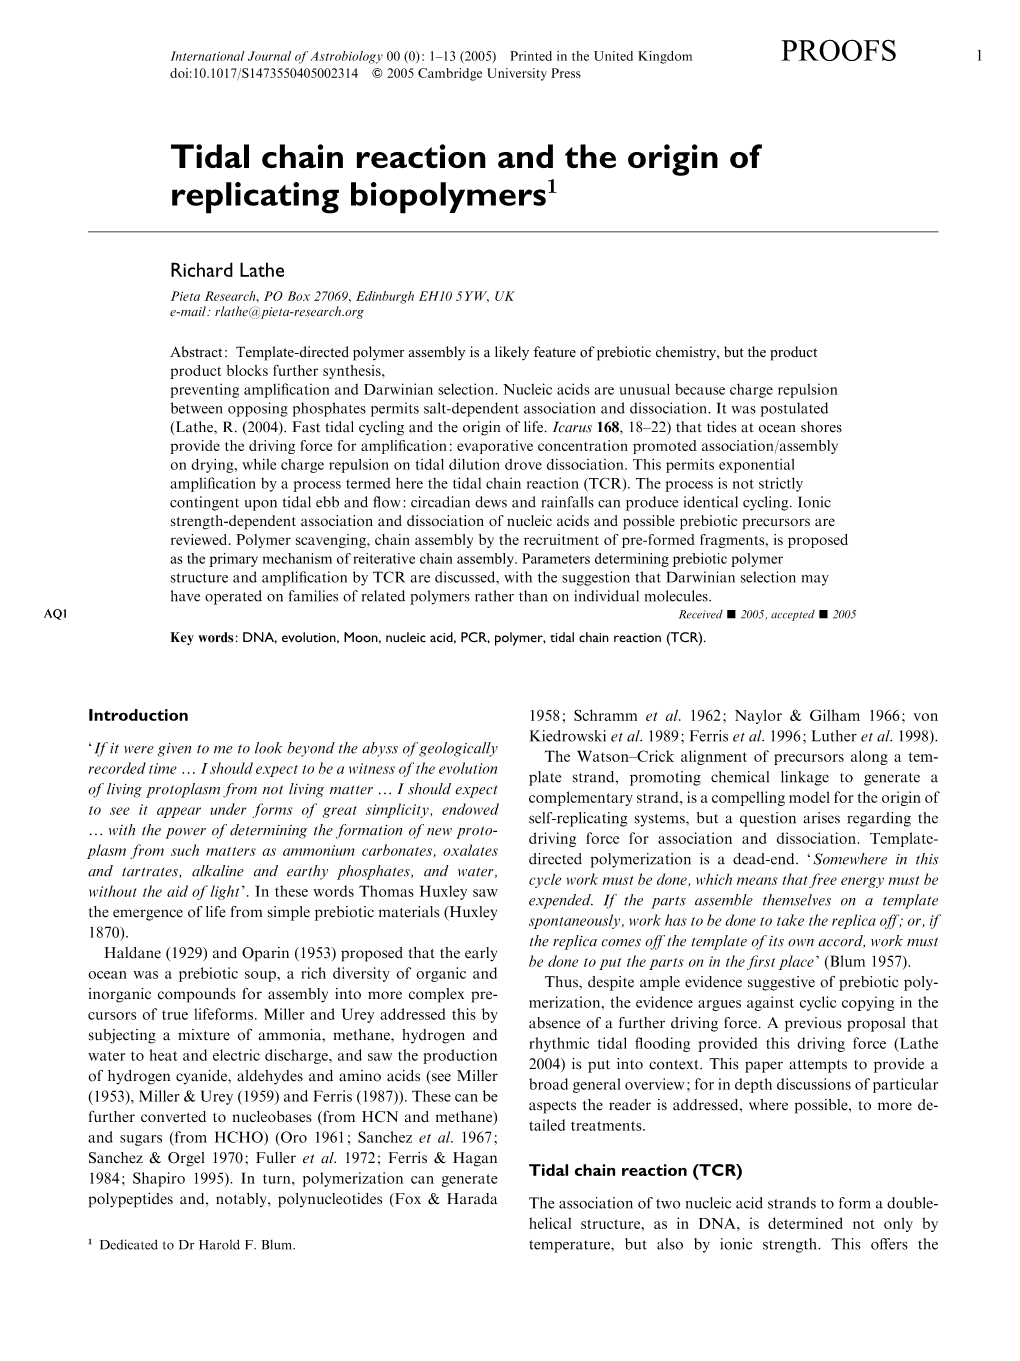 Tidal Chain Reaction and the Origin of Replicating Biopolymers1